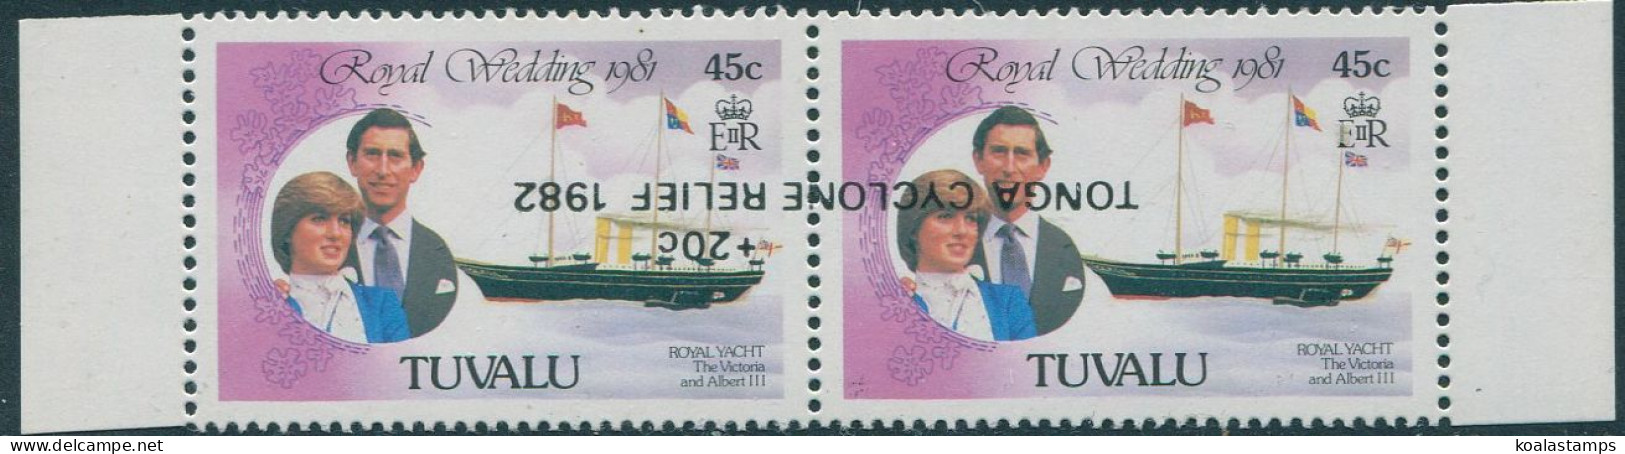 Tuvalu 1982 SG187c 45c Royal Yacht Cyclone Relief 20c Surcharge Inverted Pair MN - Tuvalu (fr. Elliceinseln)